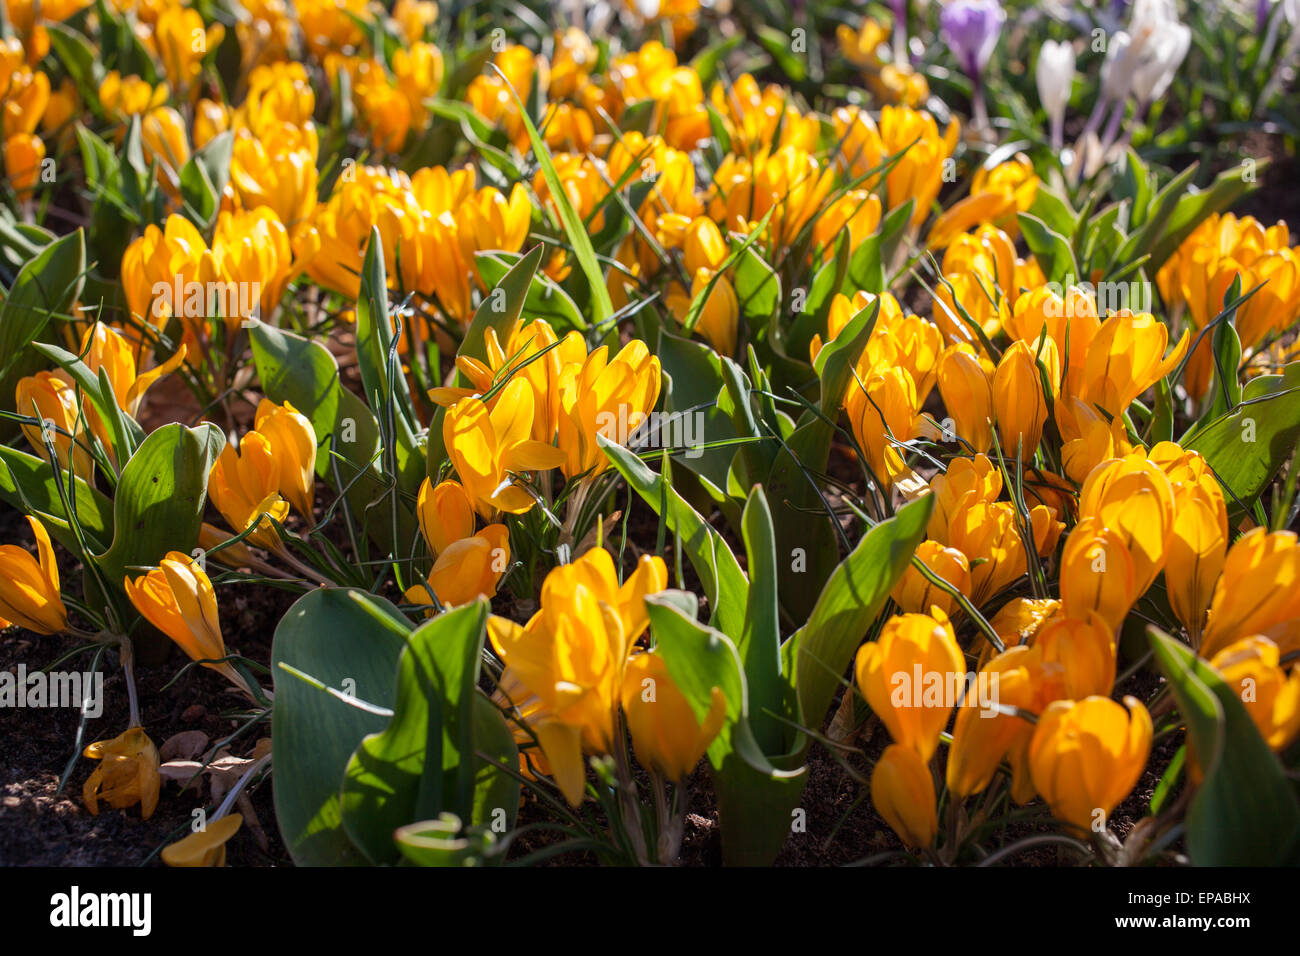 Flowers in Keukenhof park, Netherlands, also known as the Garden of Europe, is the world's largest flower garden. Stock Photo